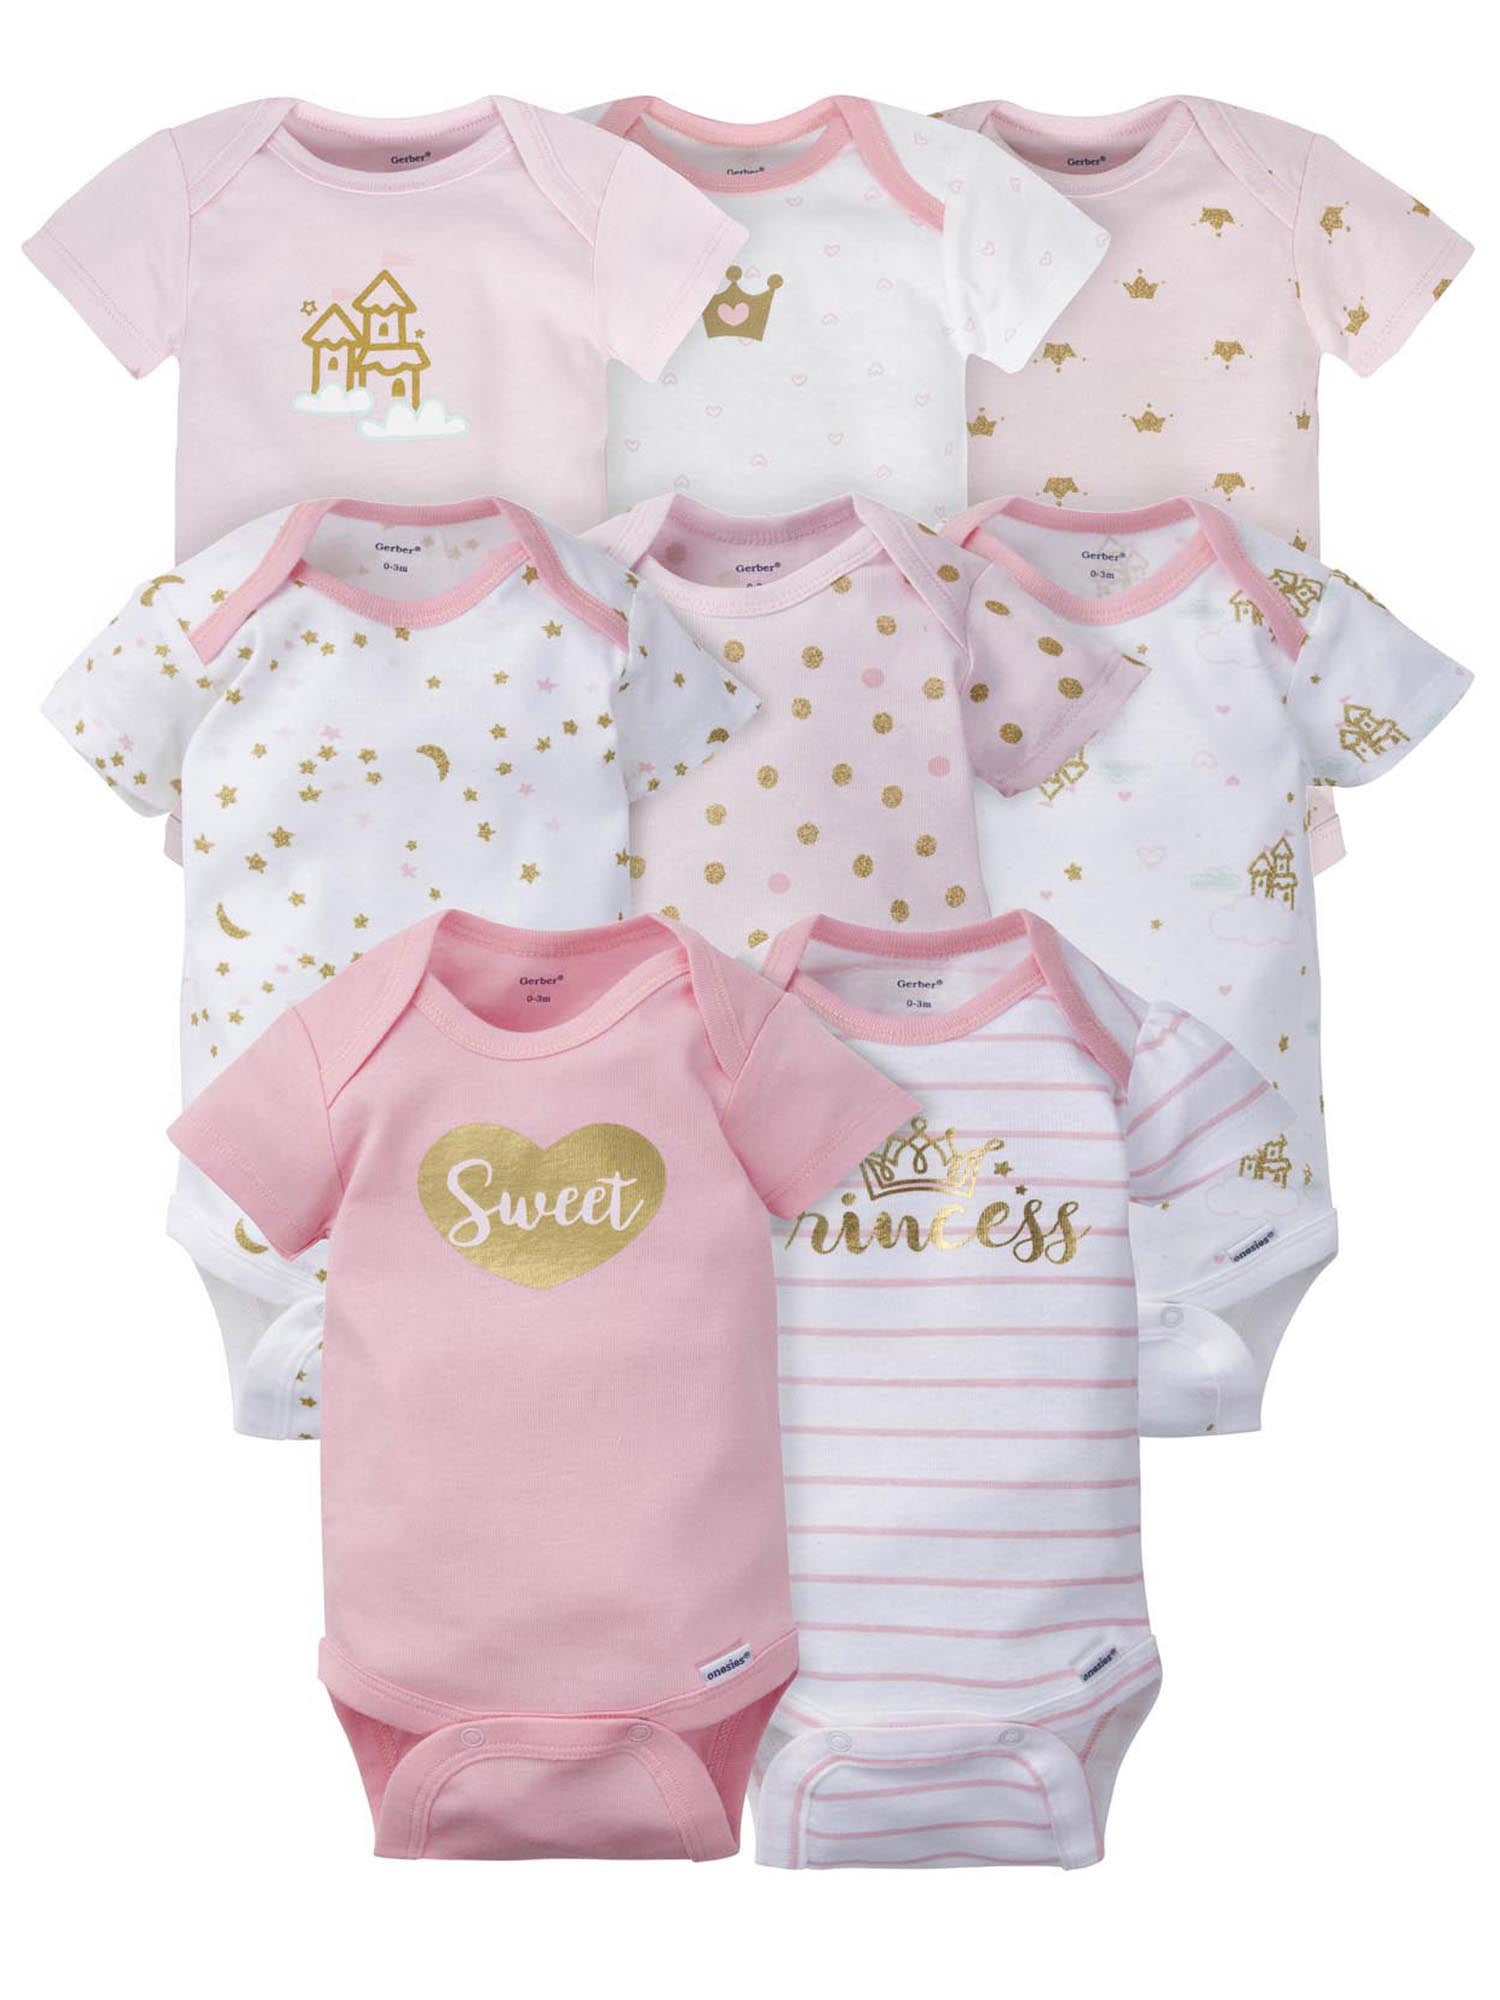 Baby Girl Clothes Gerber 2 PACK Girls Onesies White Pink Princess NEW 